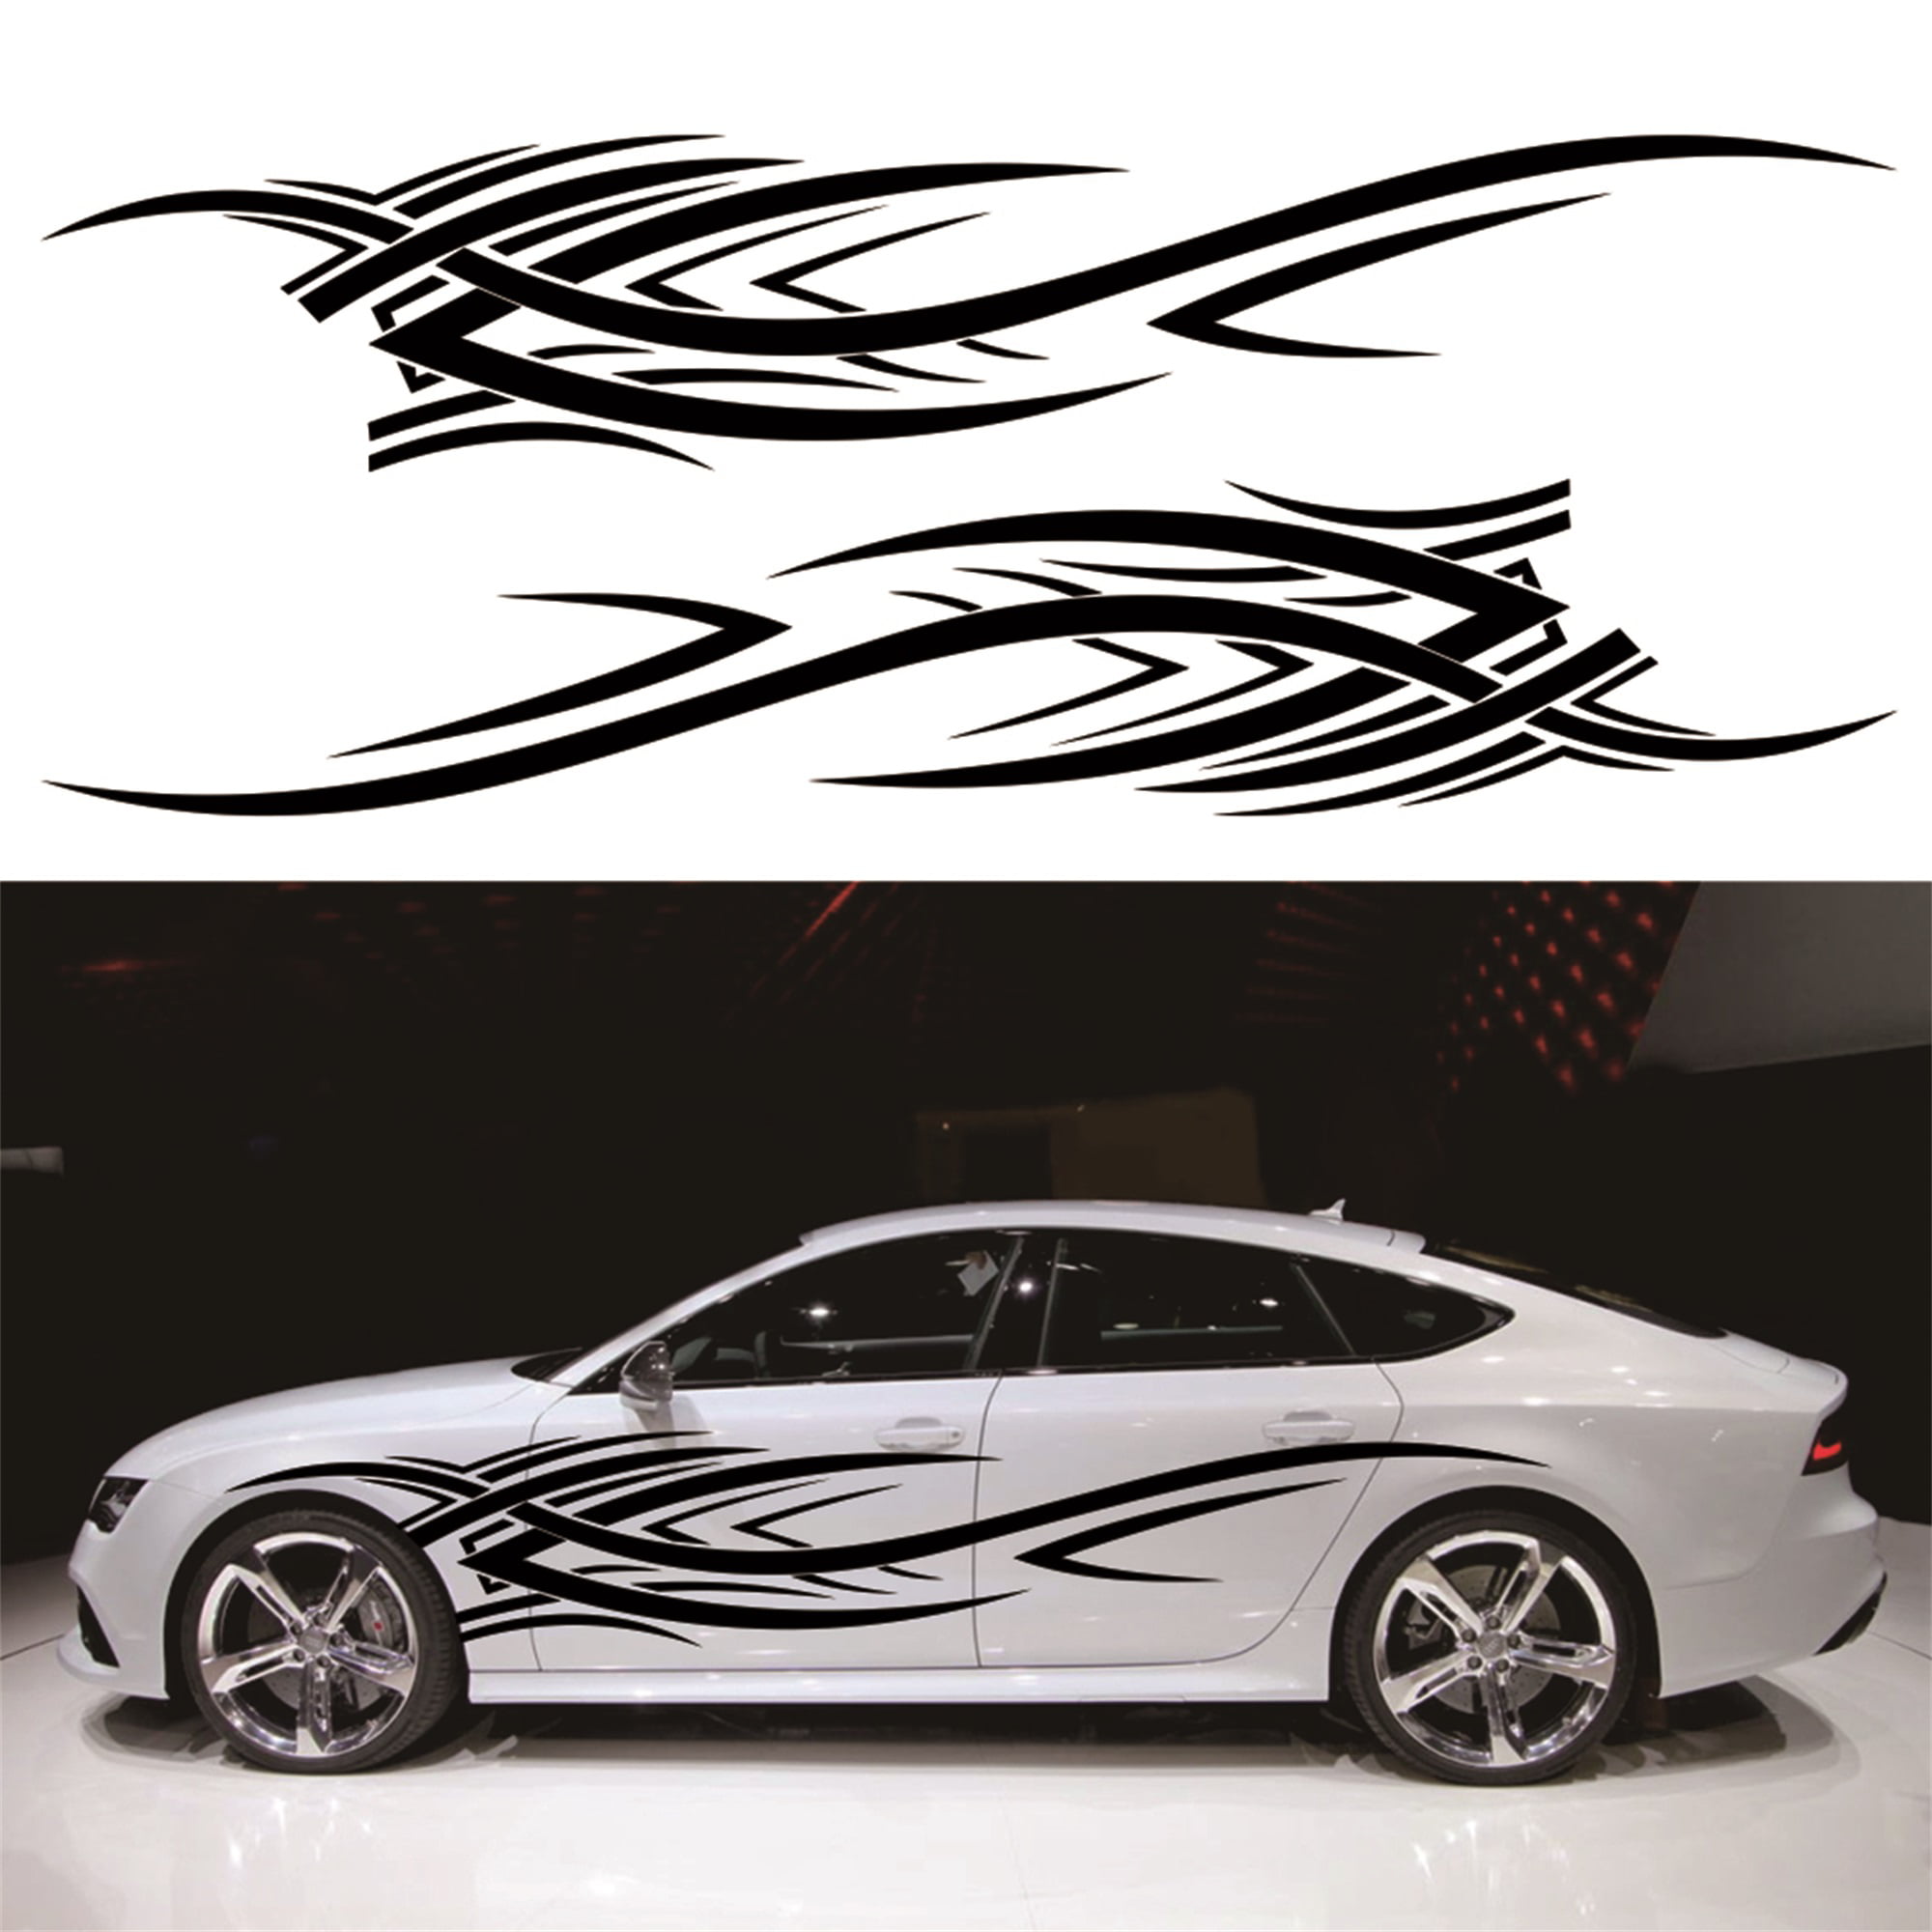 3,840 Car Sticker Design Black Color Royalty-Free Photos and Stock Images